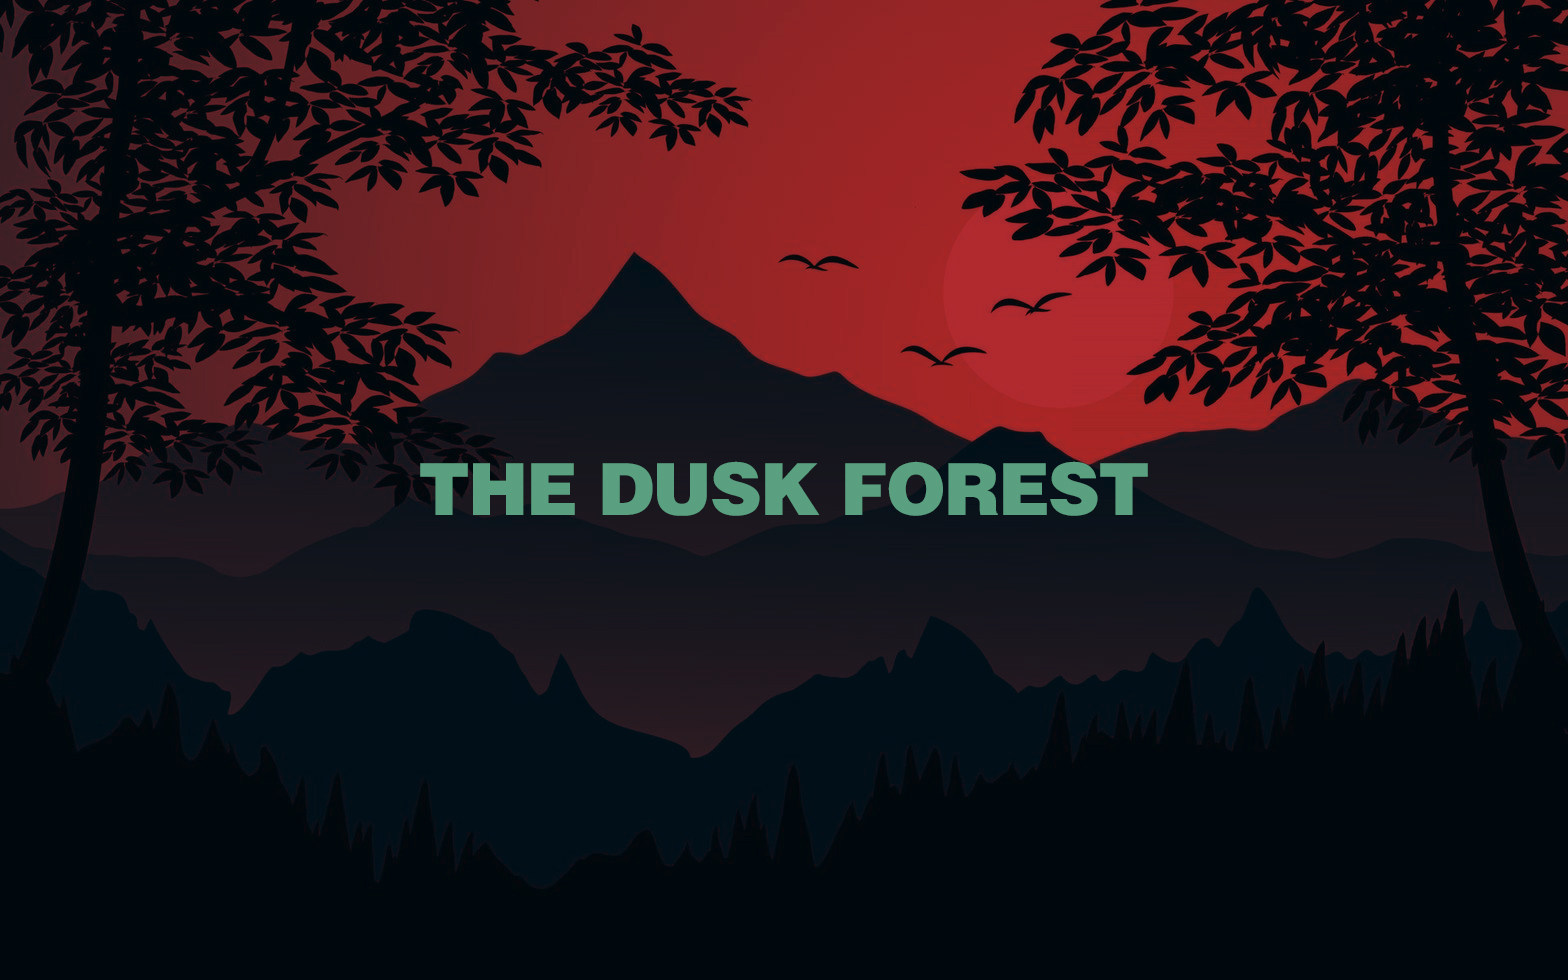 The Dusk Forest